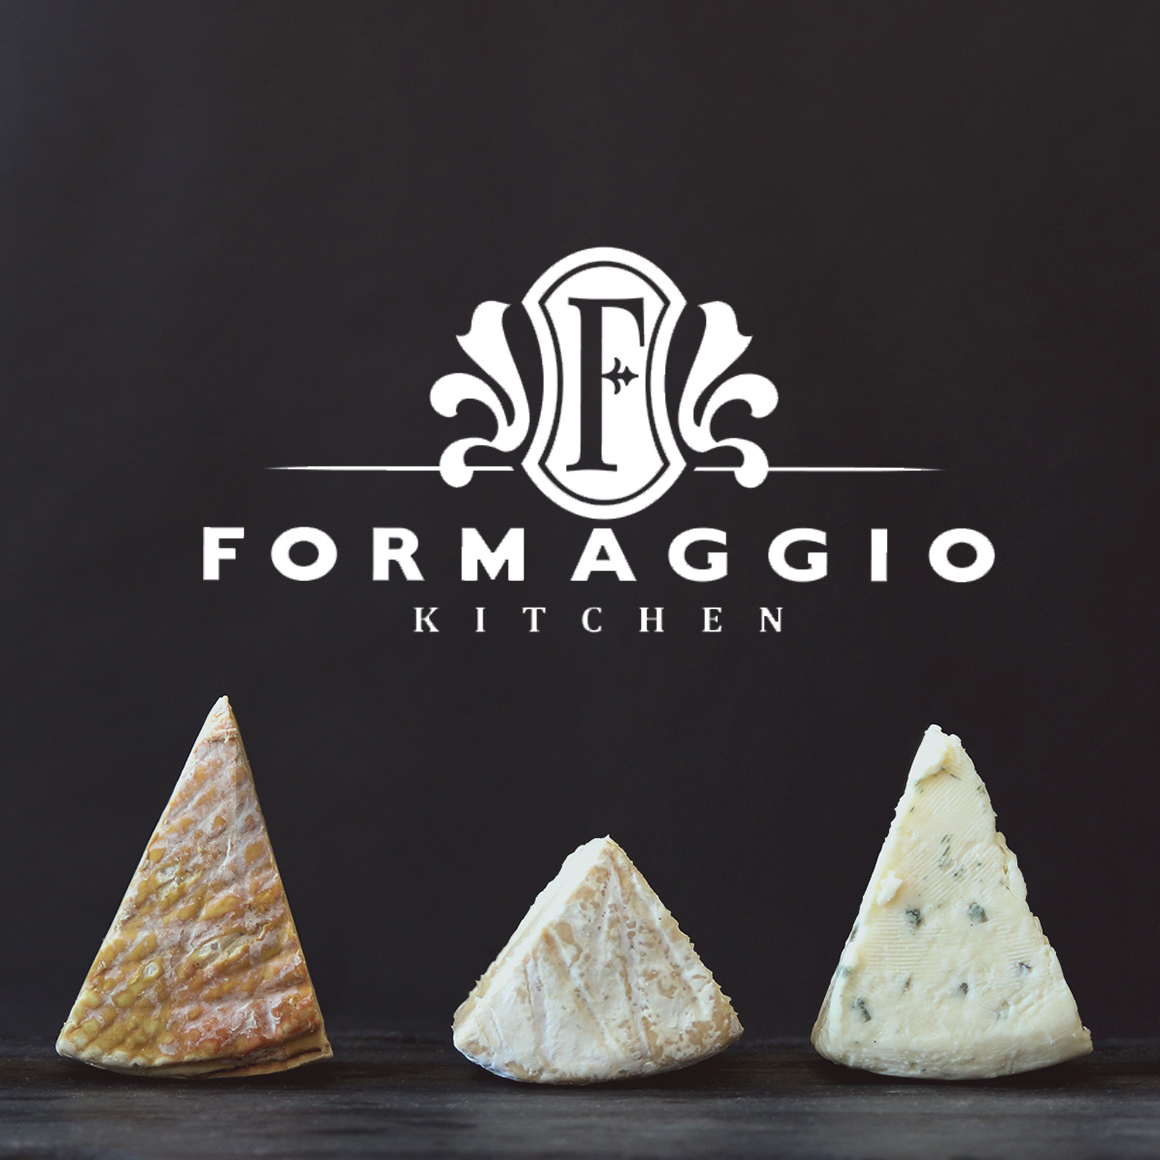 Beer And Cheese Pairing With Formaggio Kitchen And Bone Up Brewing